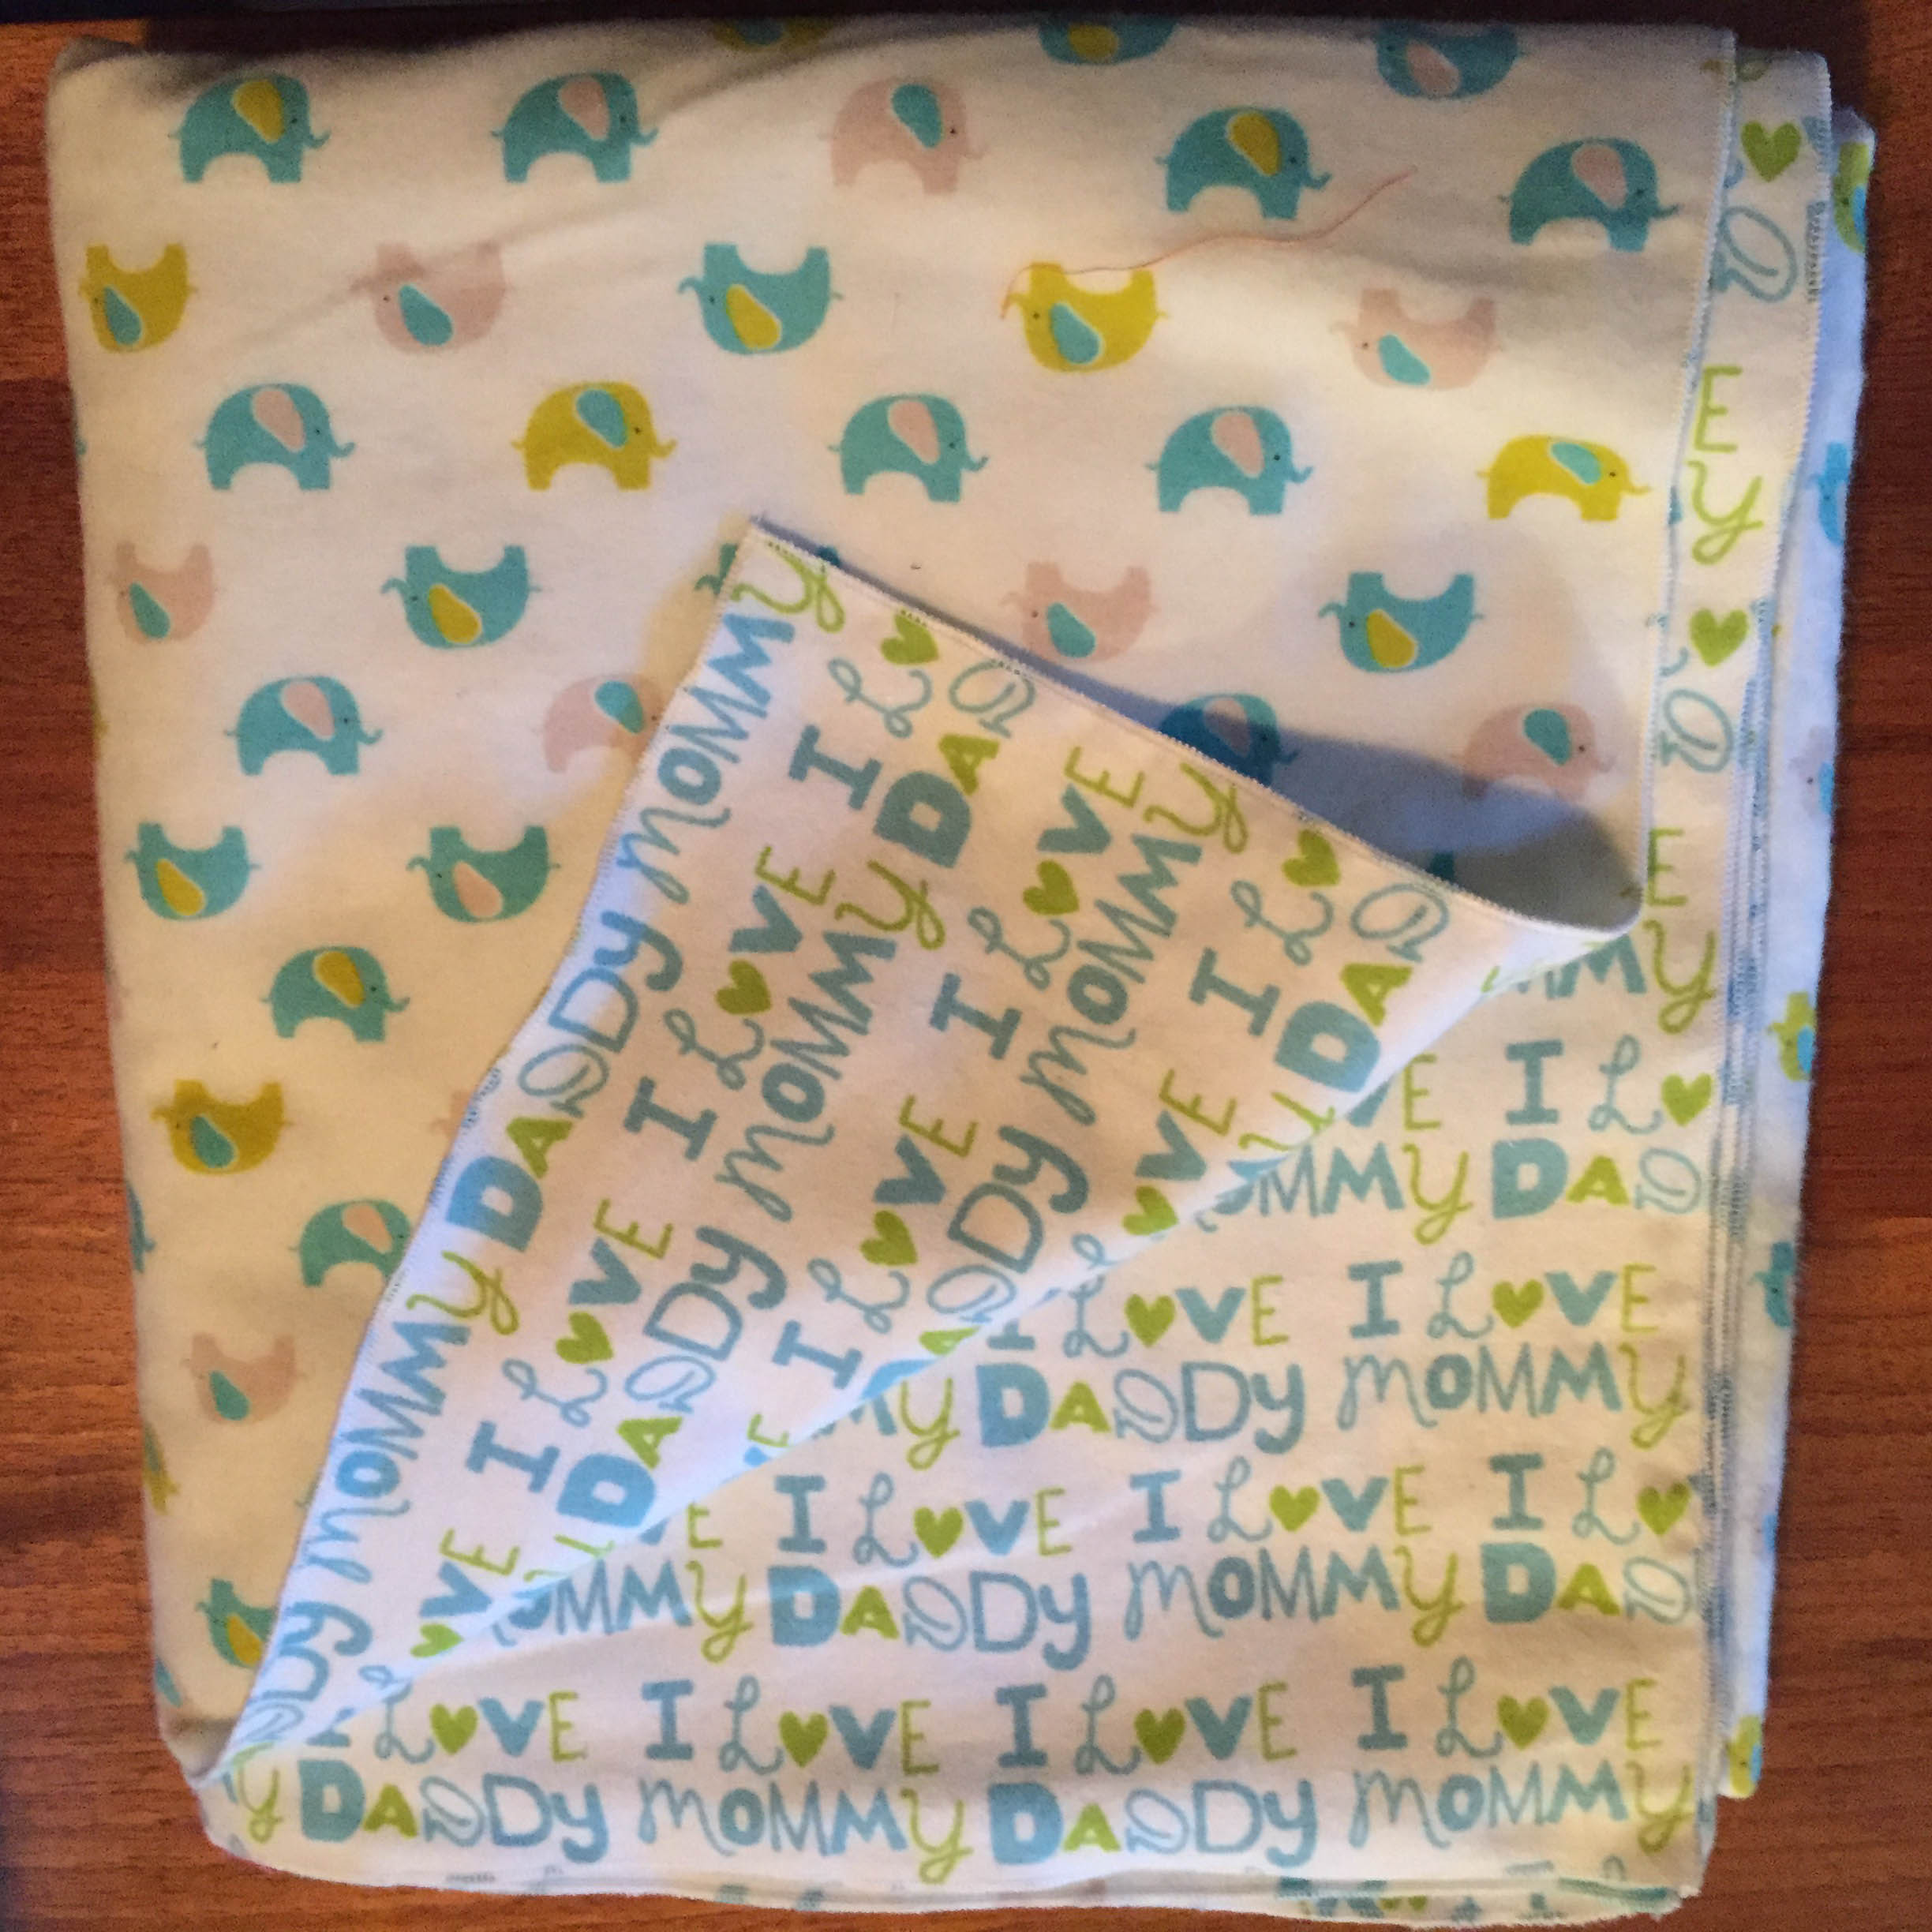 She made this blanket for a friend's new grandbaby.